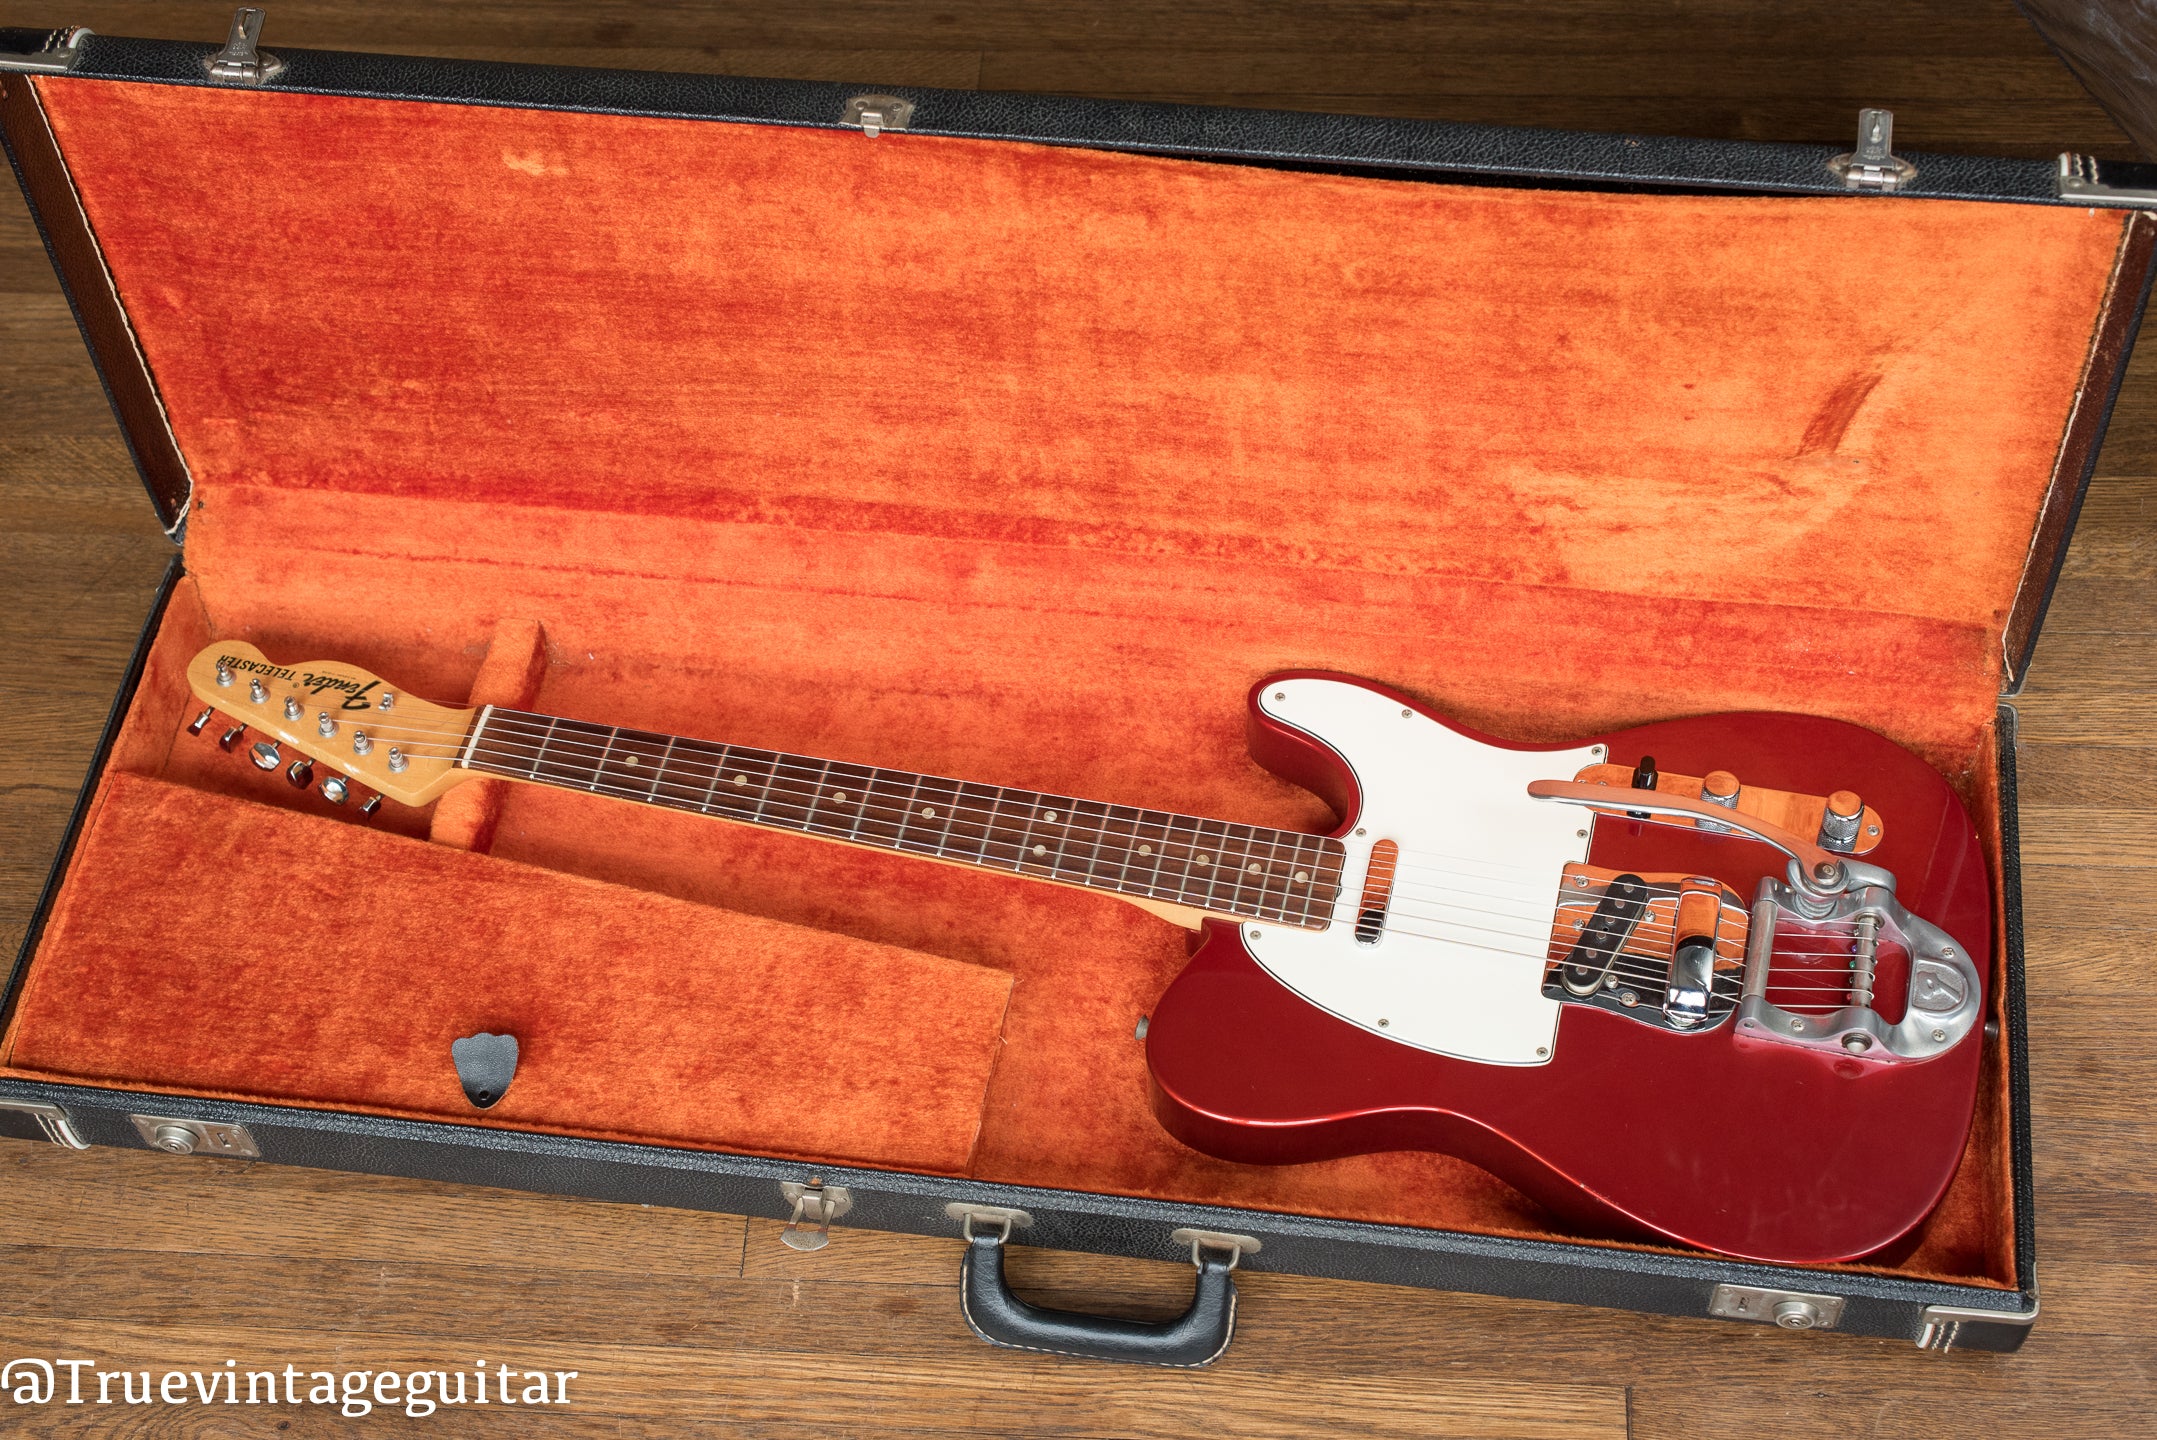 Vintage 1968 Fender Telecaster Candy Apple Red Metallic Bigsby electric guitar in original case